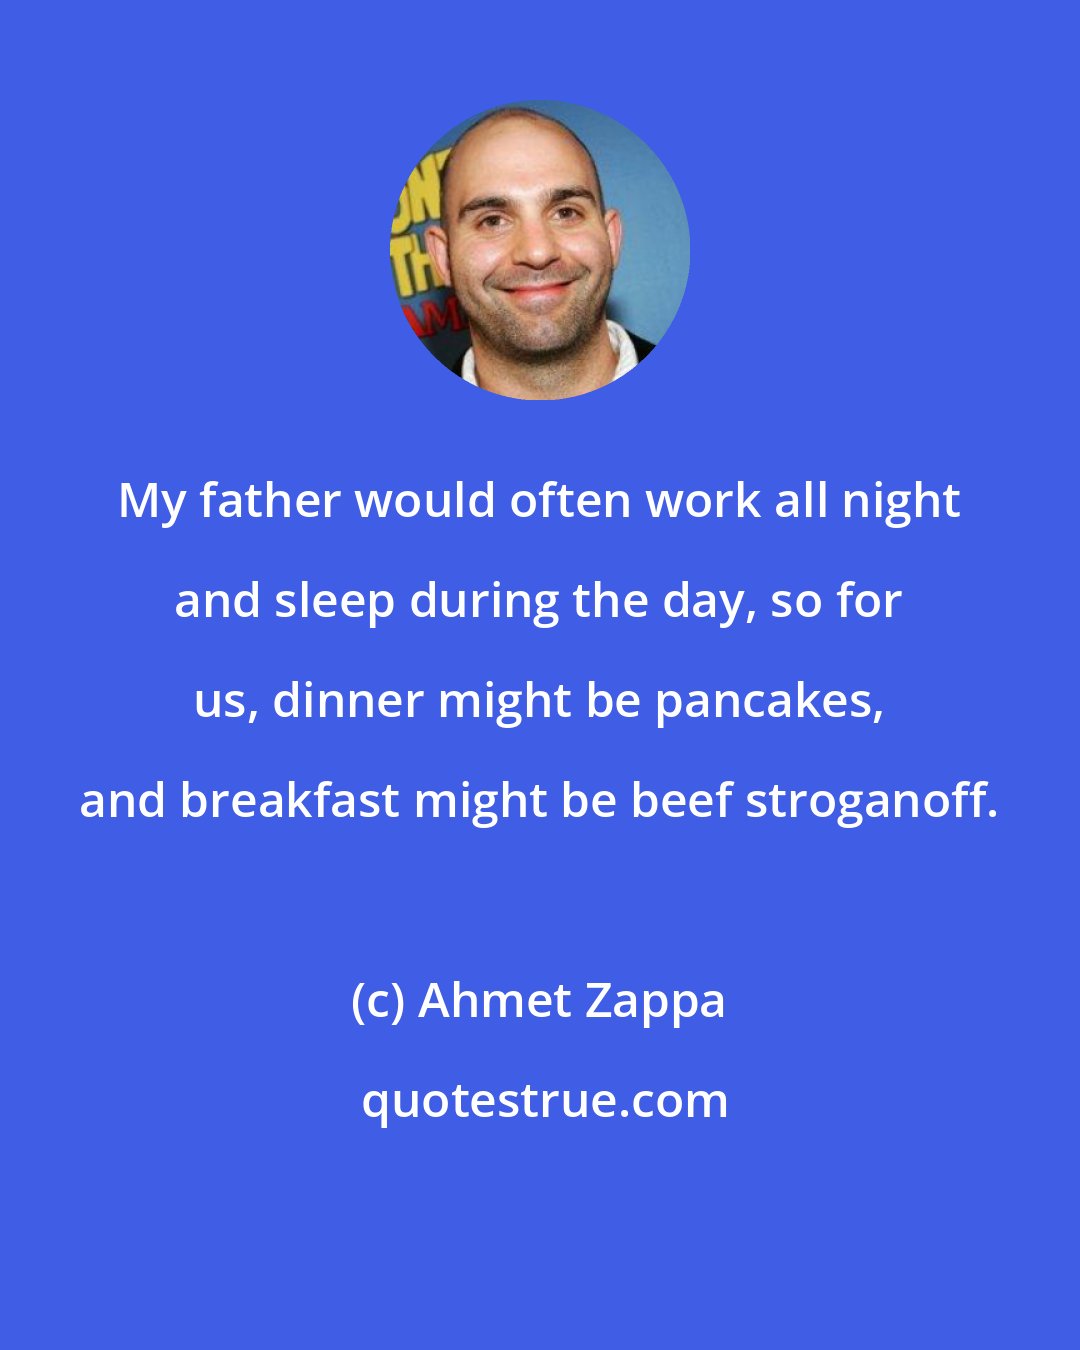 Ahmet Zappa: My father would often work all night and sleep during the day, so for us, dinner might be pancakes, and breakfast might be beef stroganoff.